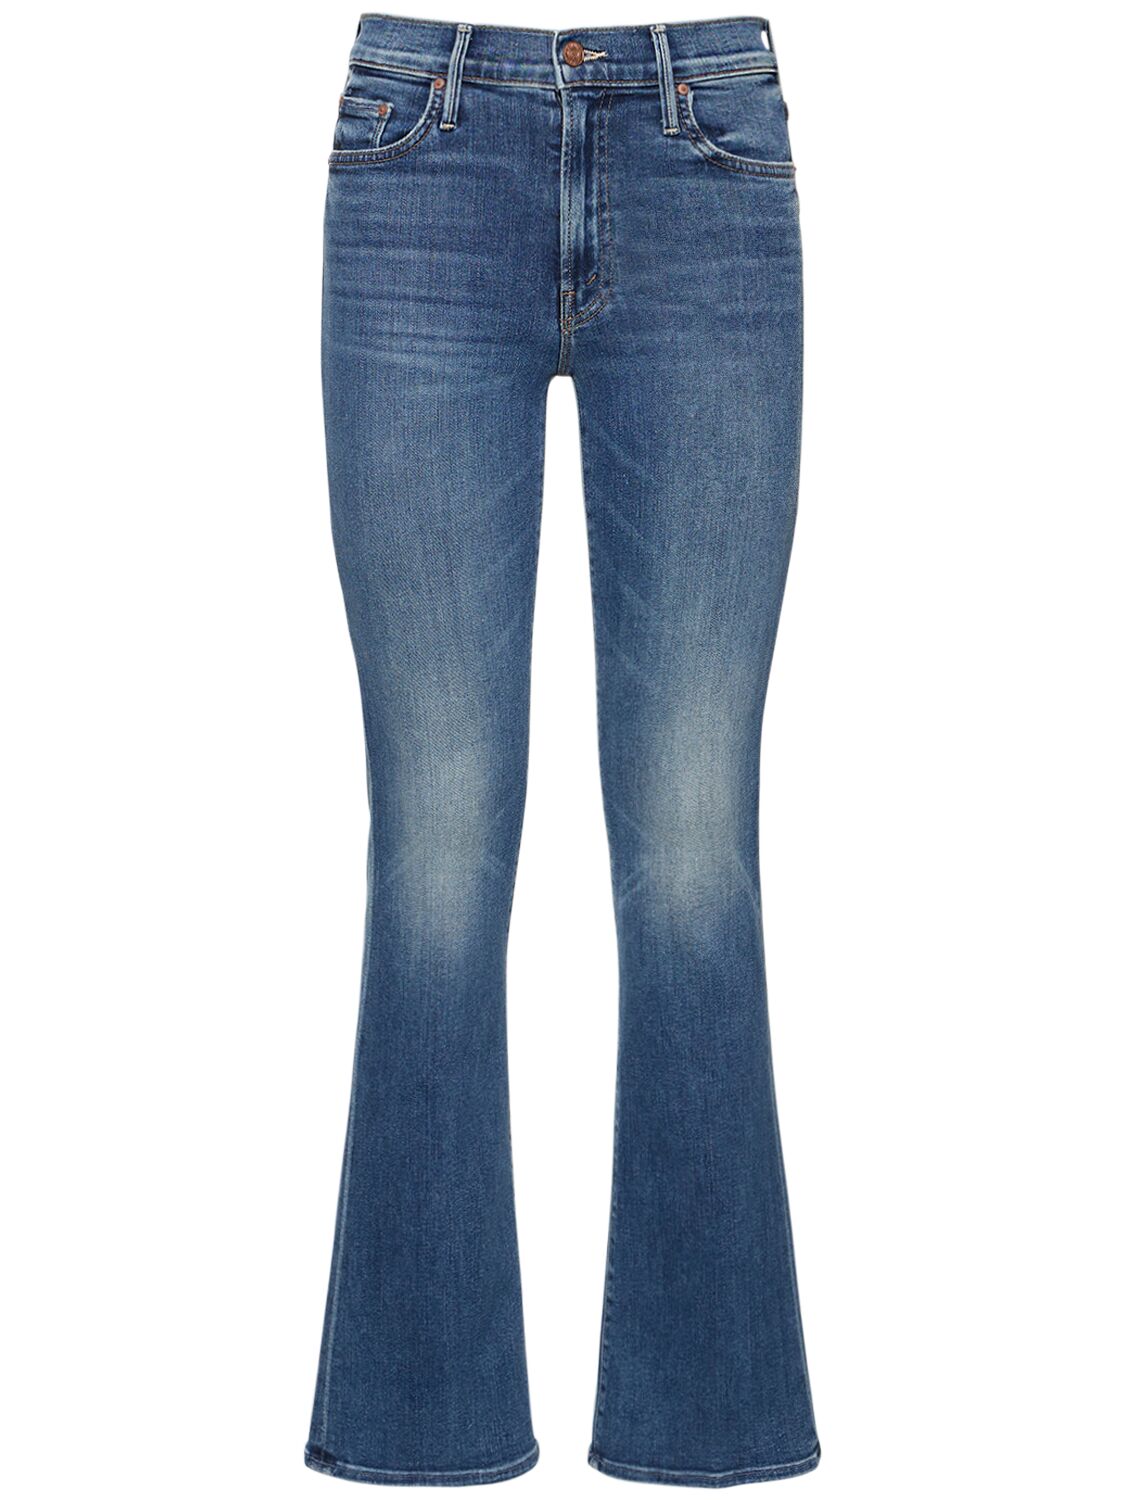 Image of The Outsider Sneak Mid Rise Cotton Jeans